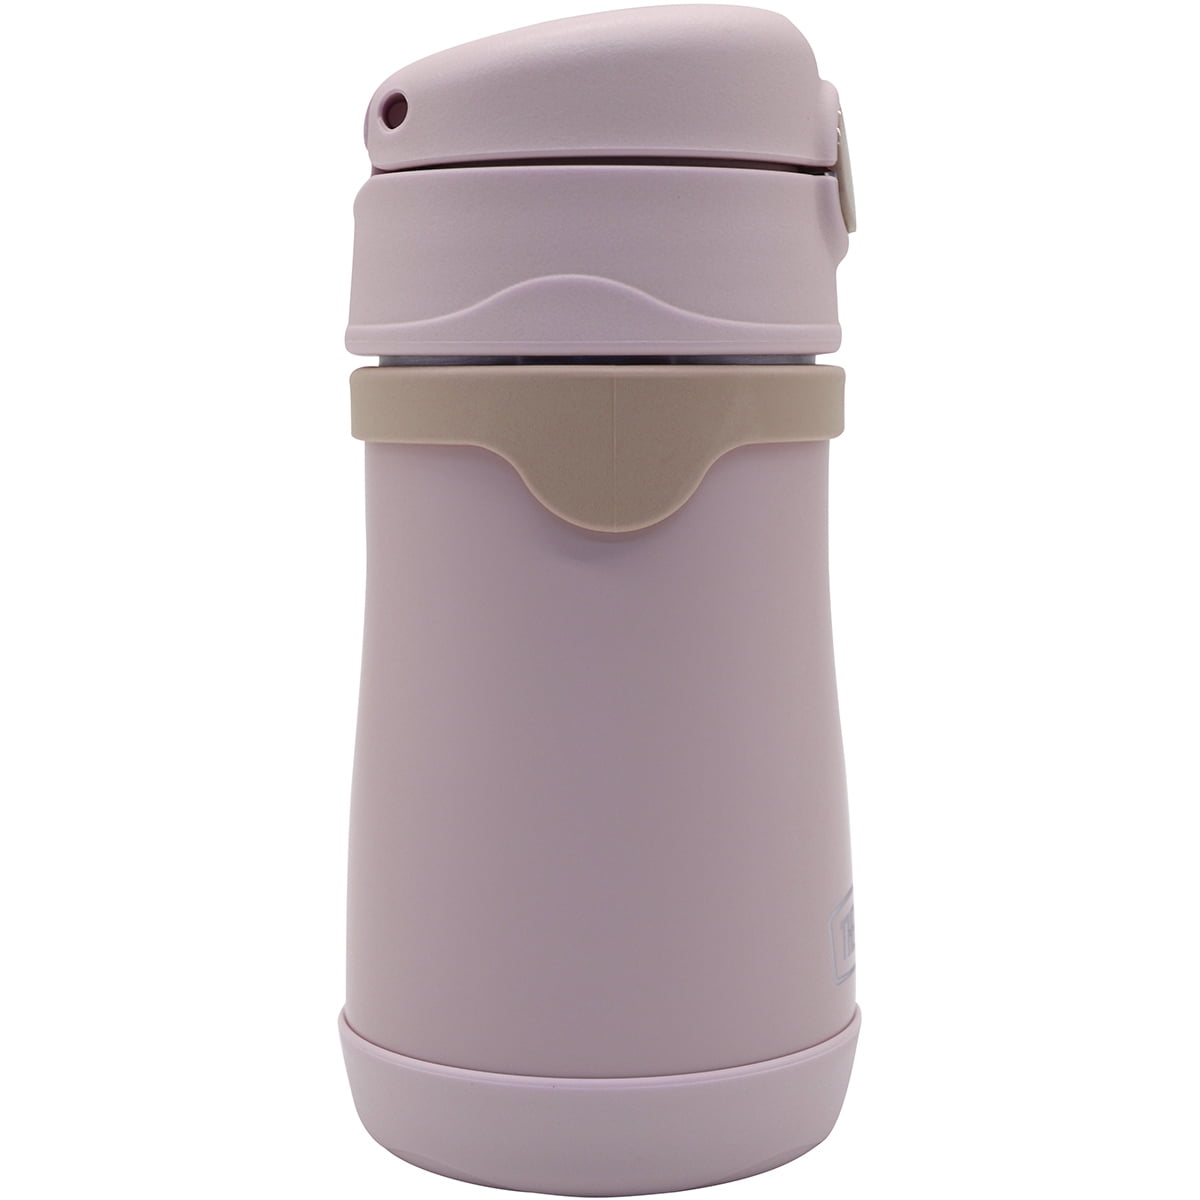 Thermos Baby 7 oz. Vacuum Insulated Stainless Steel Food Jar - Rose